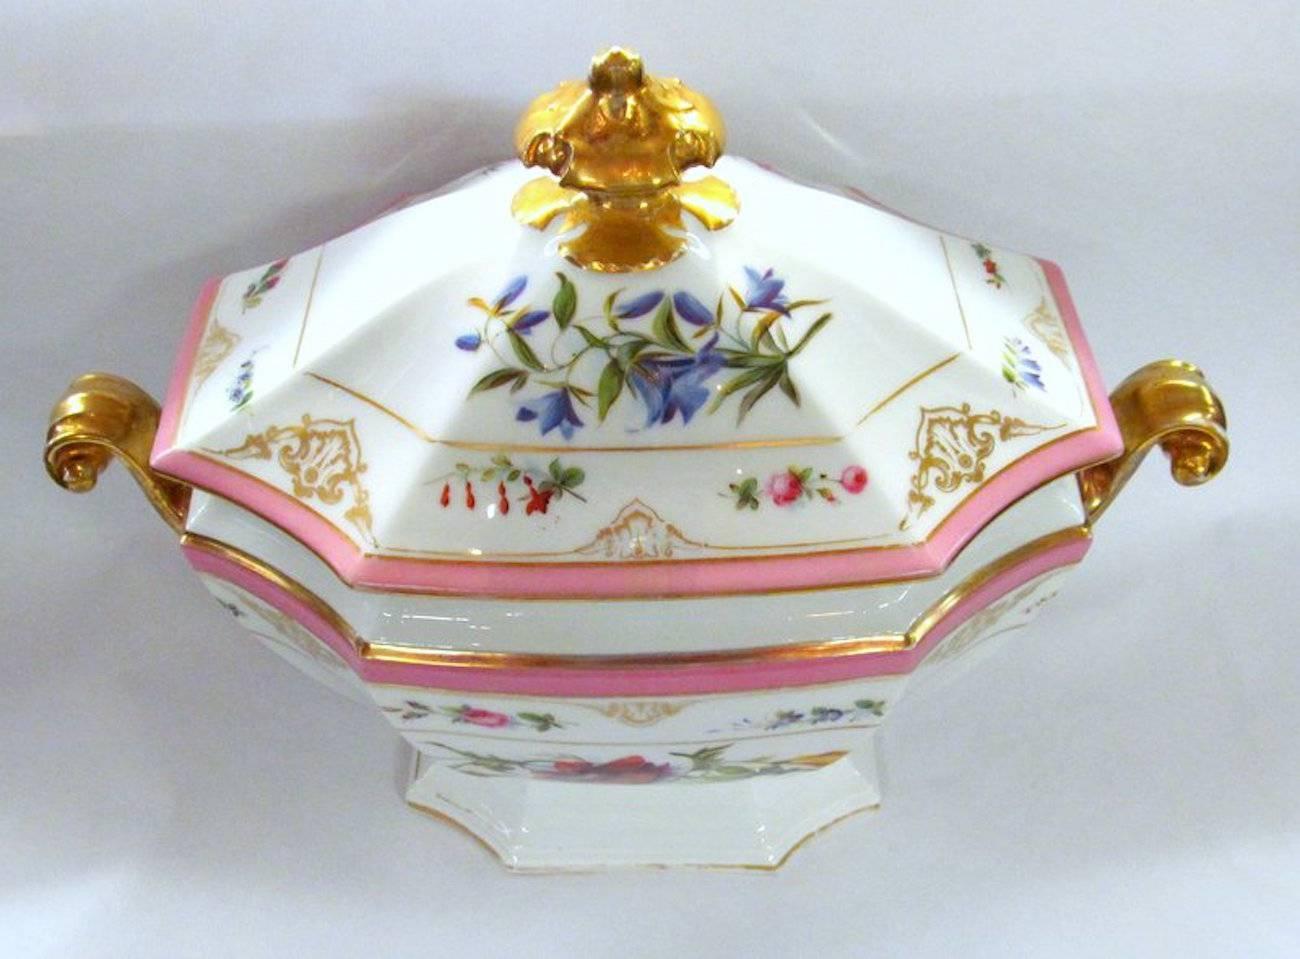 Exceptional quality antique French porcelain de Paris hand-painted botanical soup tureen and matching platter.

Please note extraordinary botanical painting.

Measures platter: 19 1/2